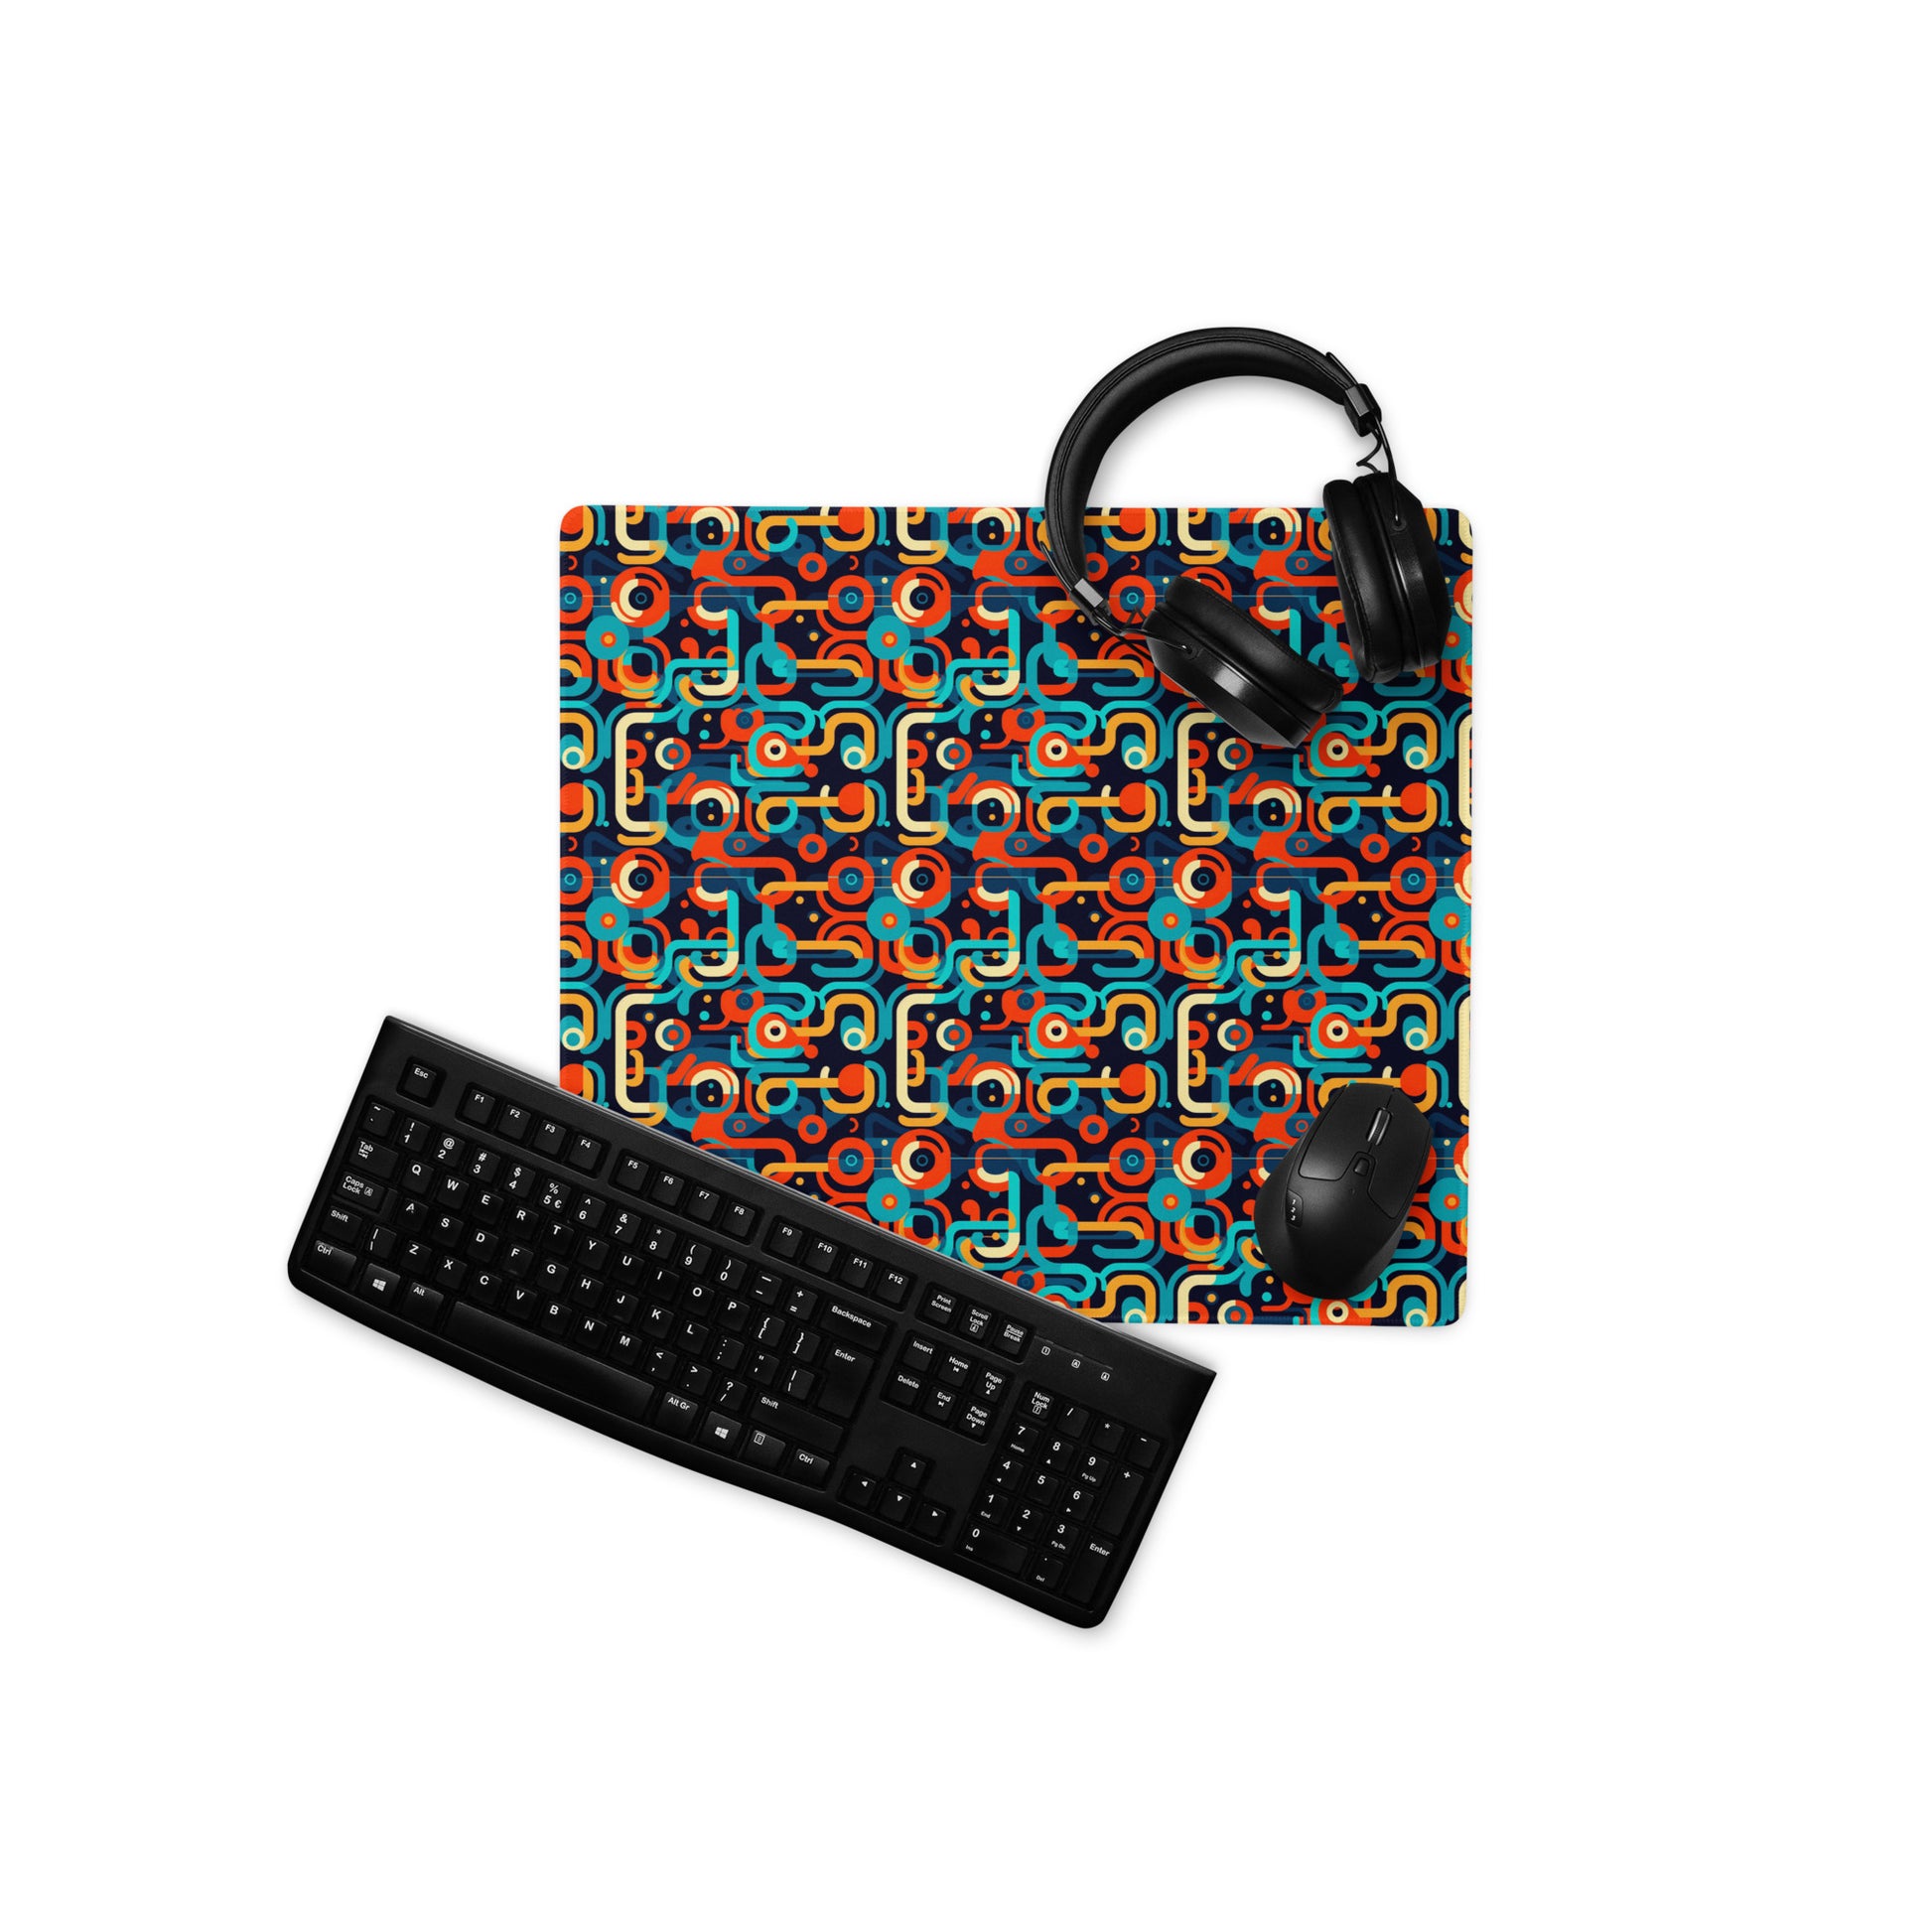 An 18" x 16" gaming desk pad with blue, orange, and beige lines on a black background. A keyboard, mouse, and headphones sit on it.